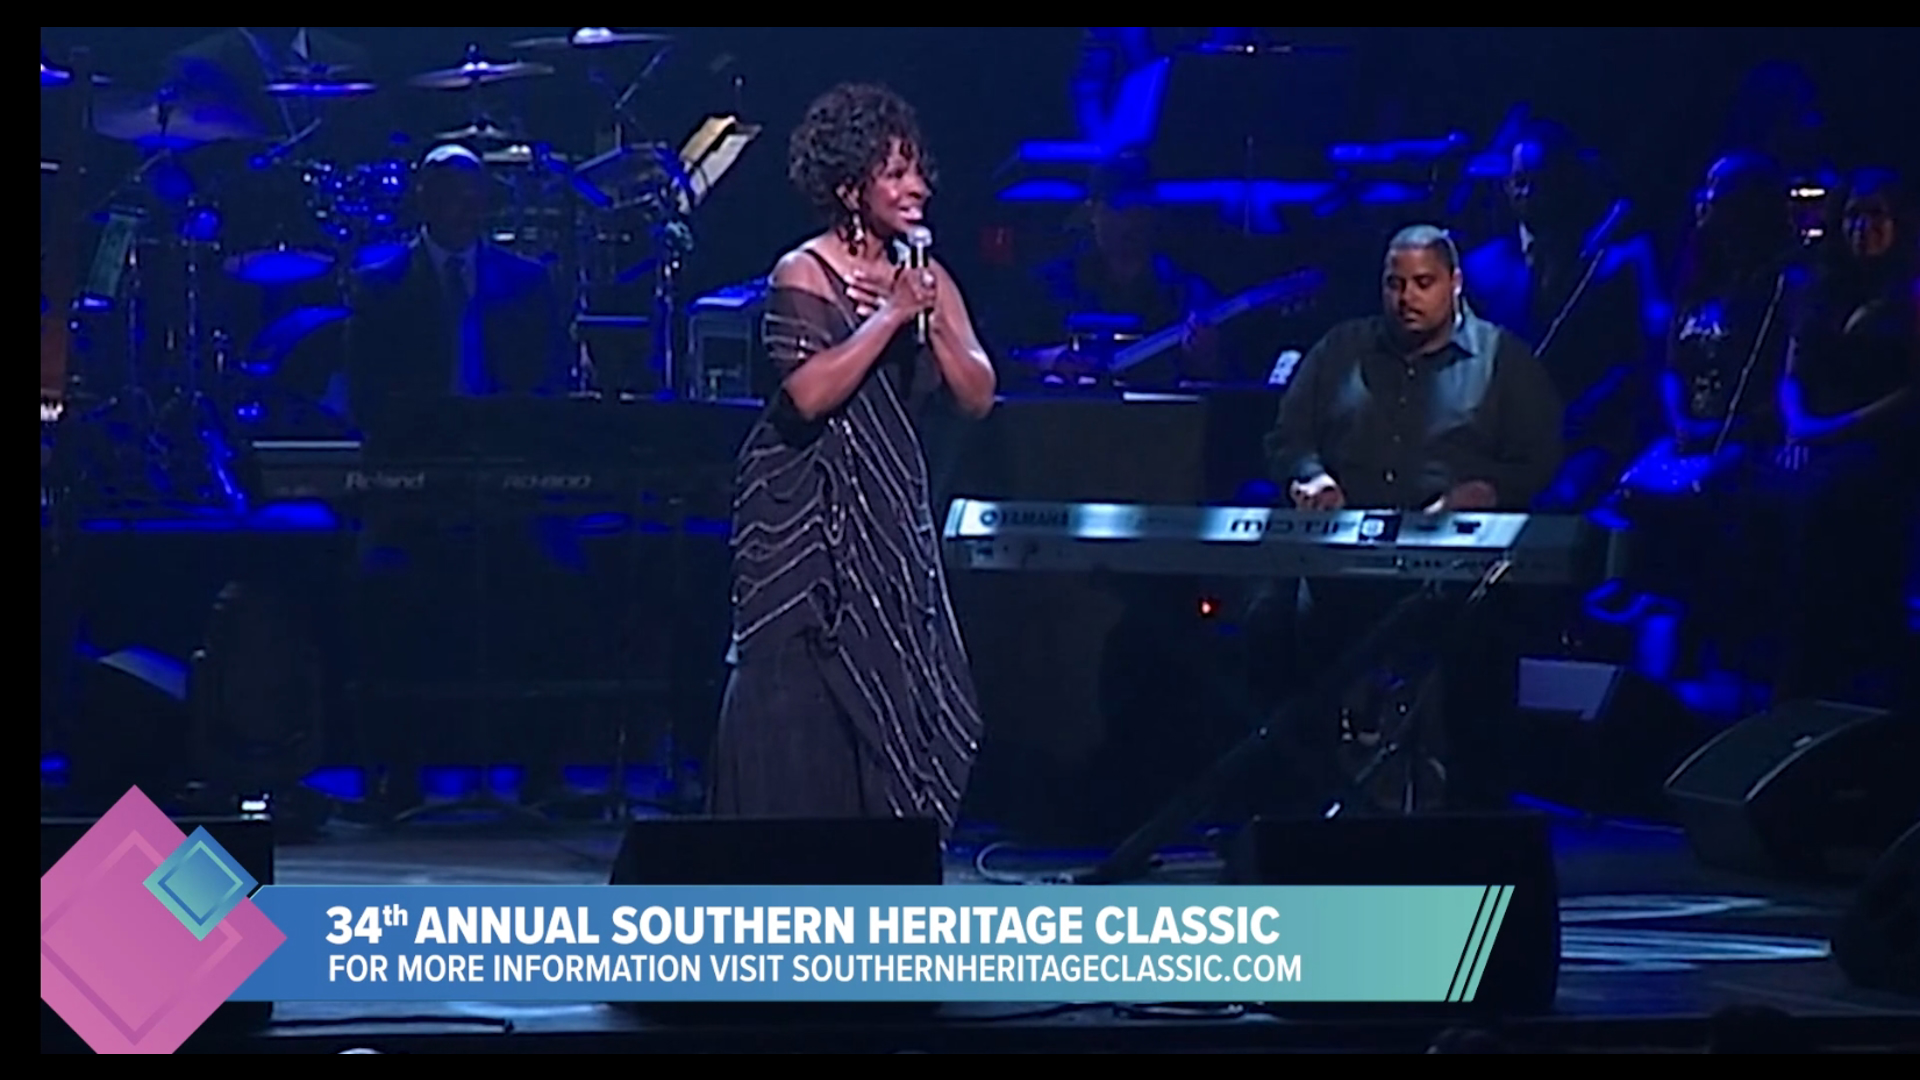 The 34th Southern Heritage Classic Cultural Celebration weekend kicks off September 7th with Gladys Knight! Find the full schedule at www.southernheritageclassic.com